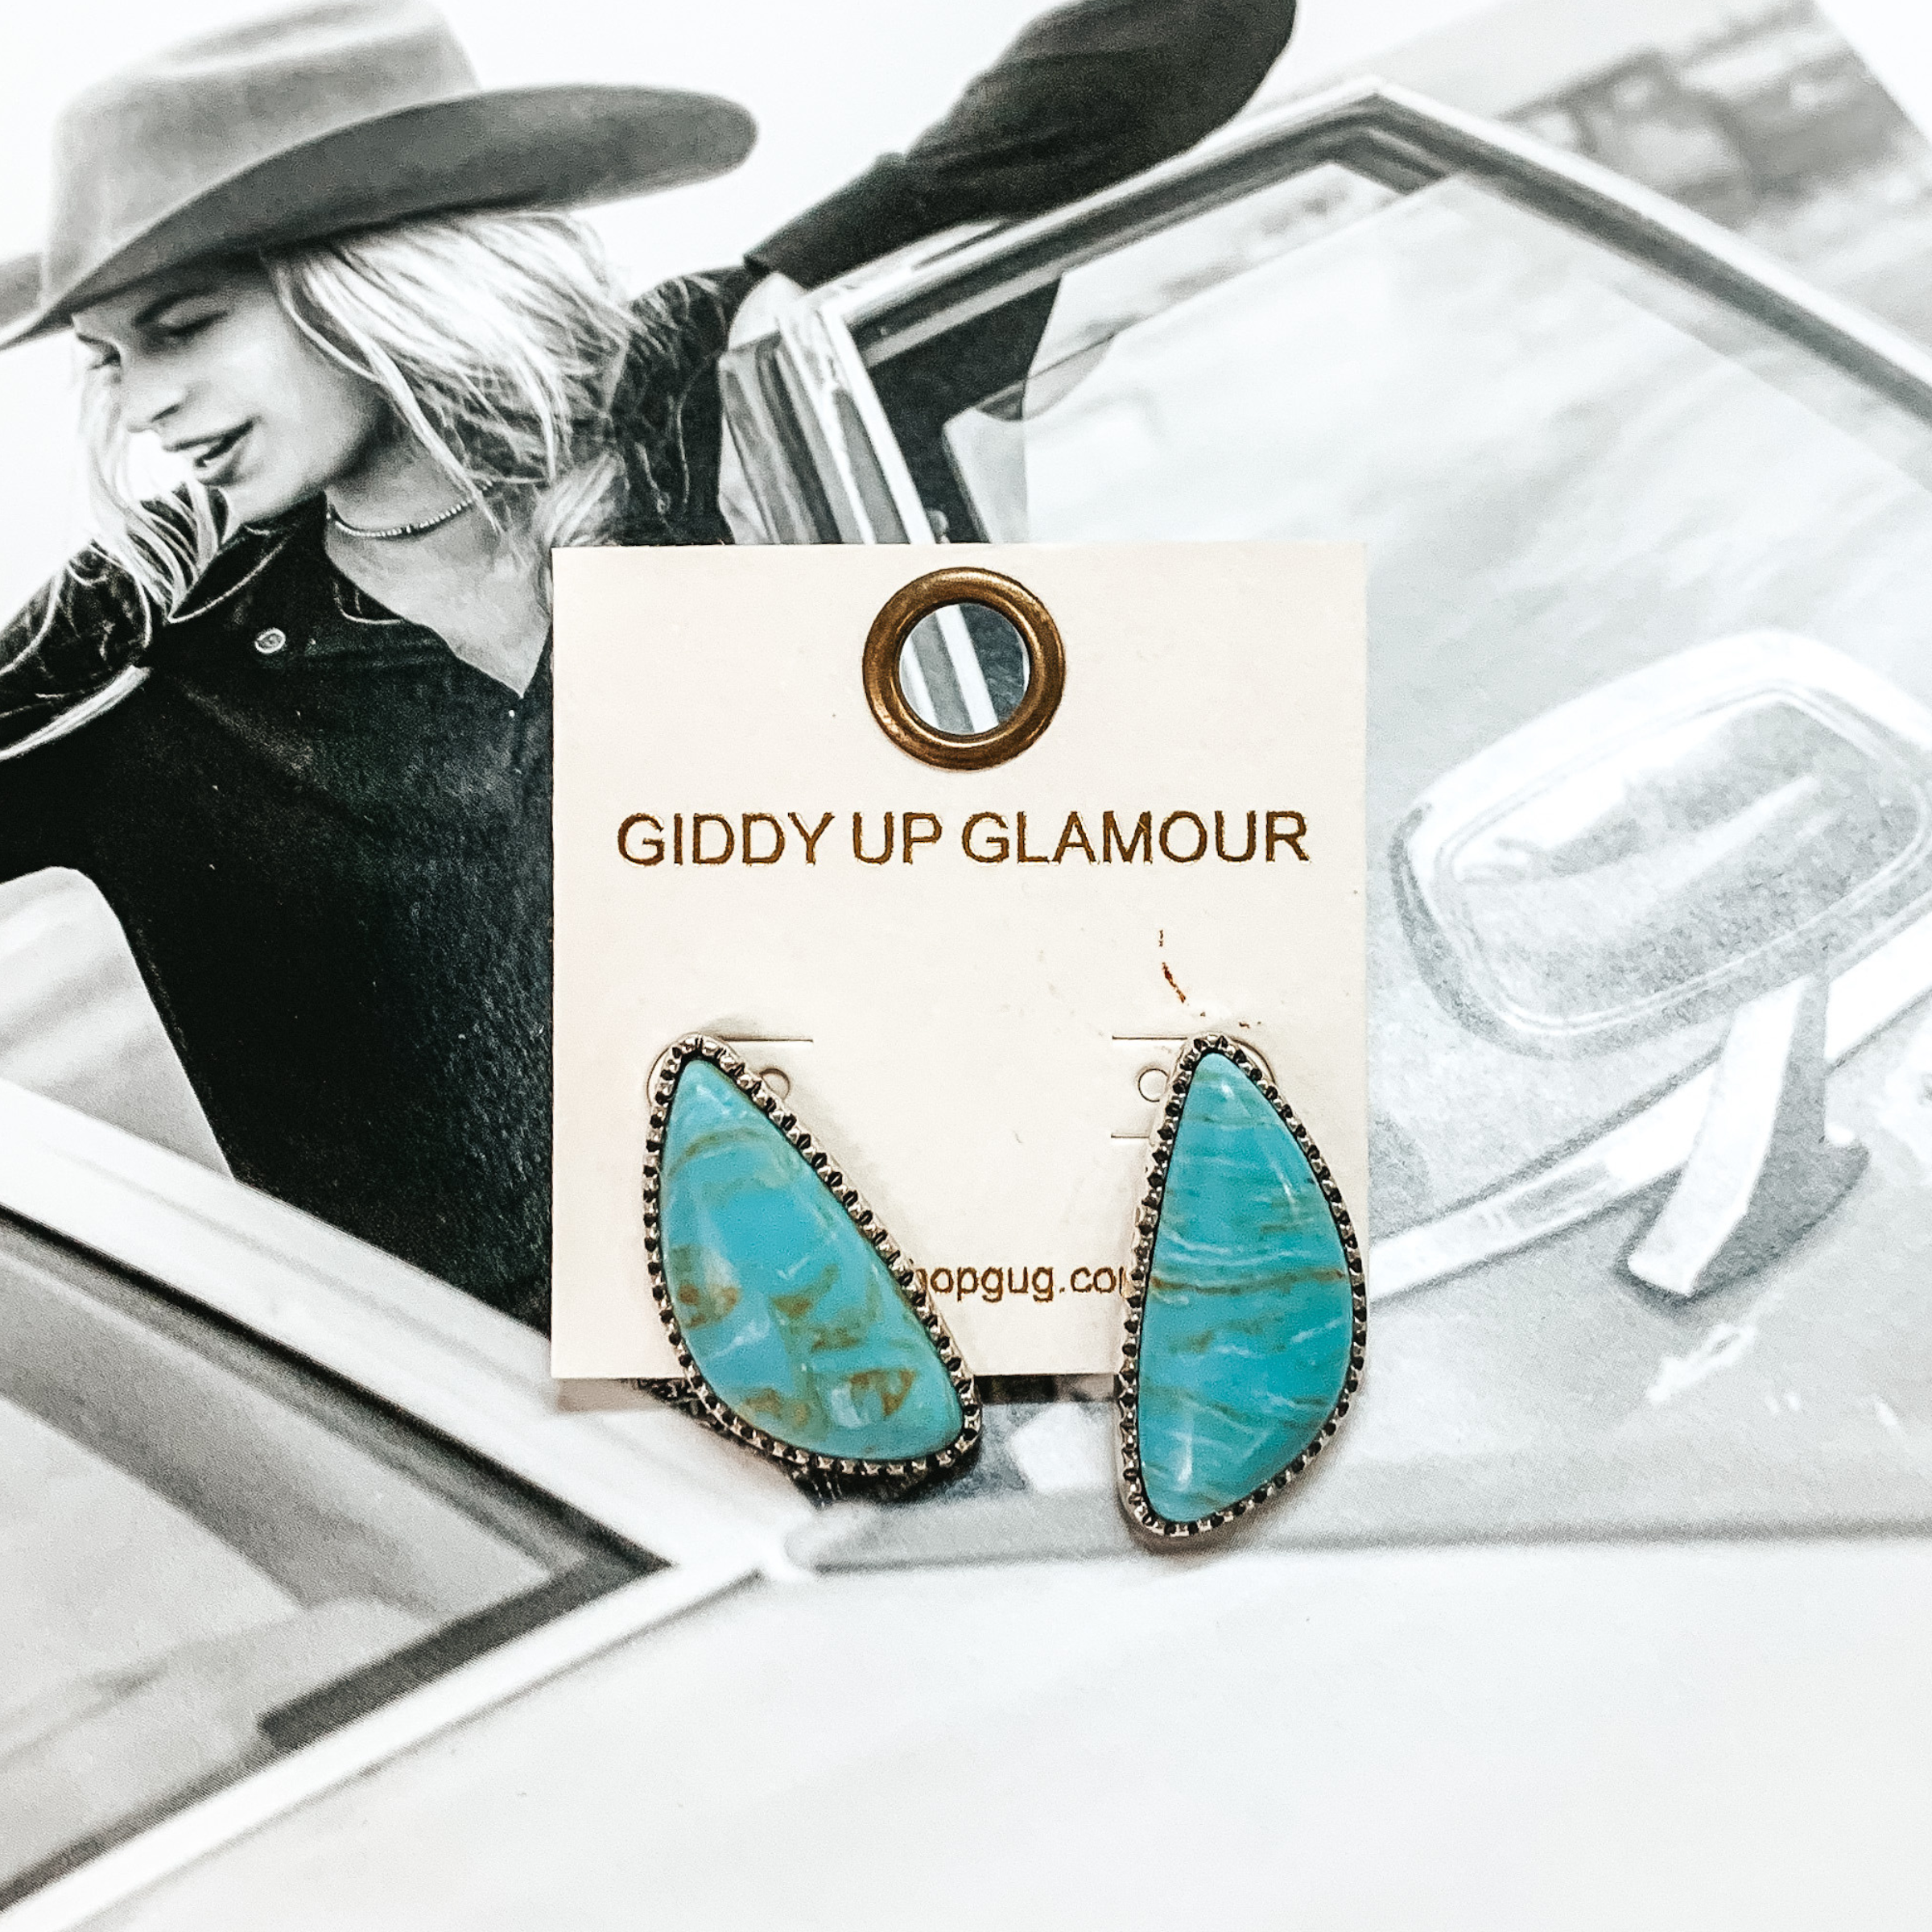 Irregular shaped turquoise stone stud earrings with a silver backing. These earrings are pictured on top of a black and white picture of a girl in a car. 